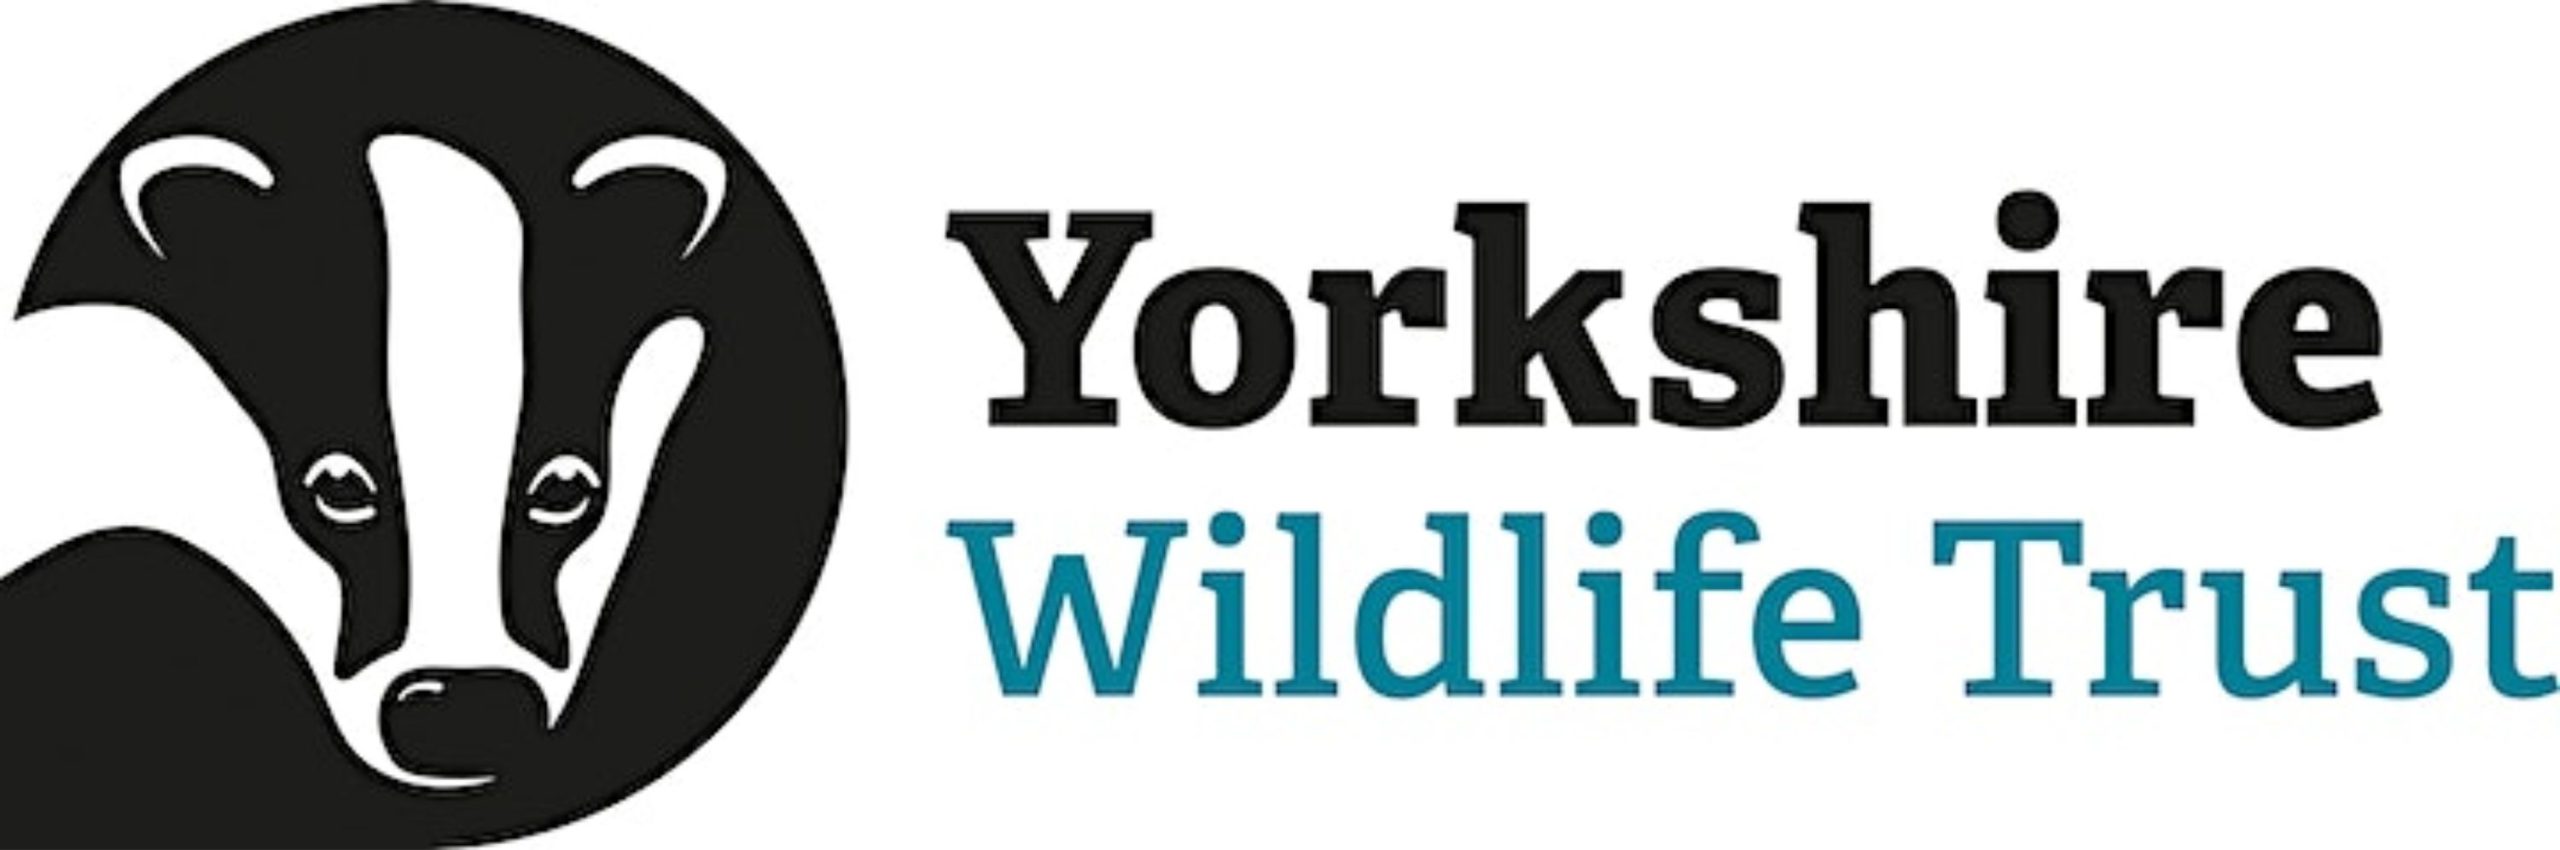 Yorkshire Wildlife Trust is the only charity entirely dedicated to conserving, protecting and enhancing Yorkshire's wildlife and wild places. Find out more about what we do on our website and discover how you can support our work.